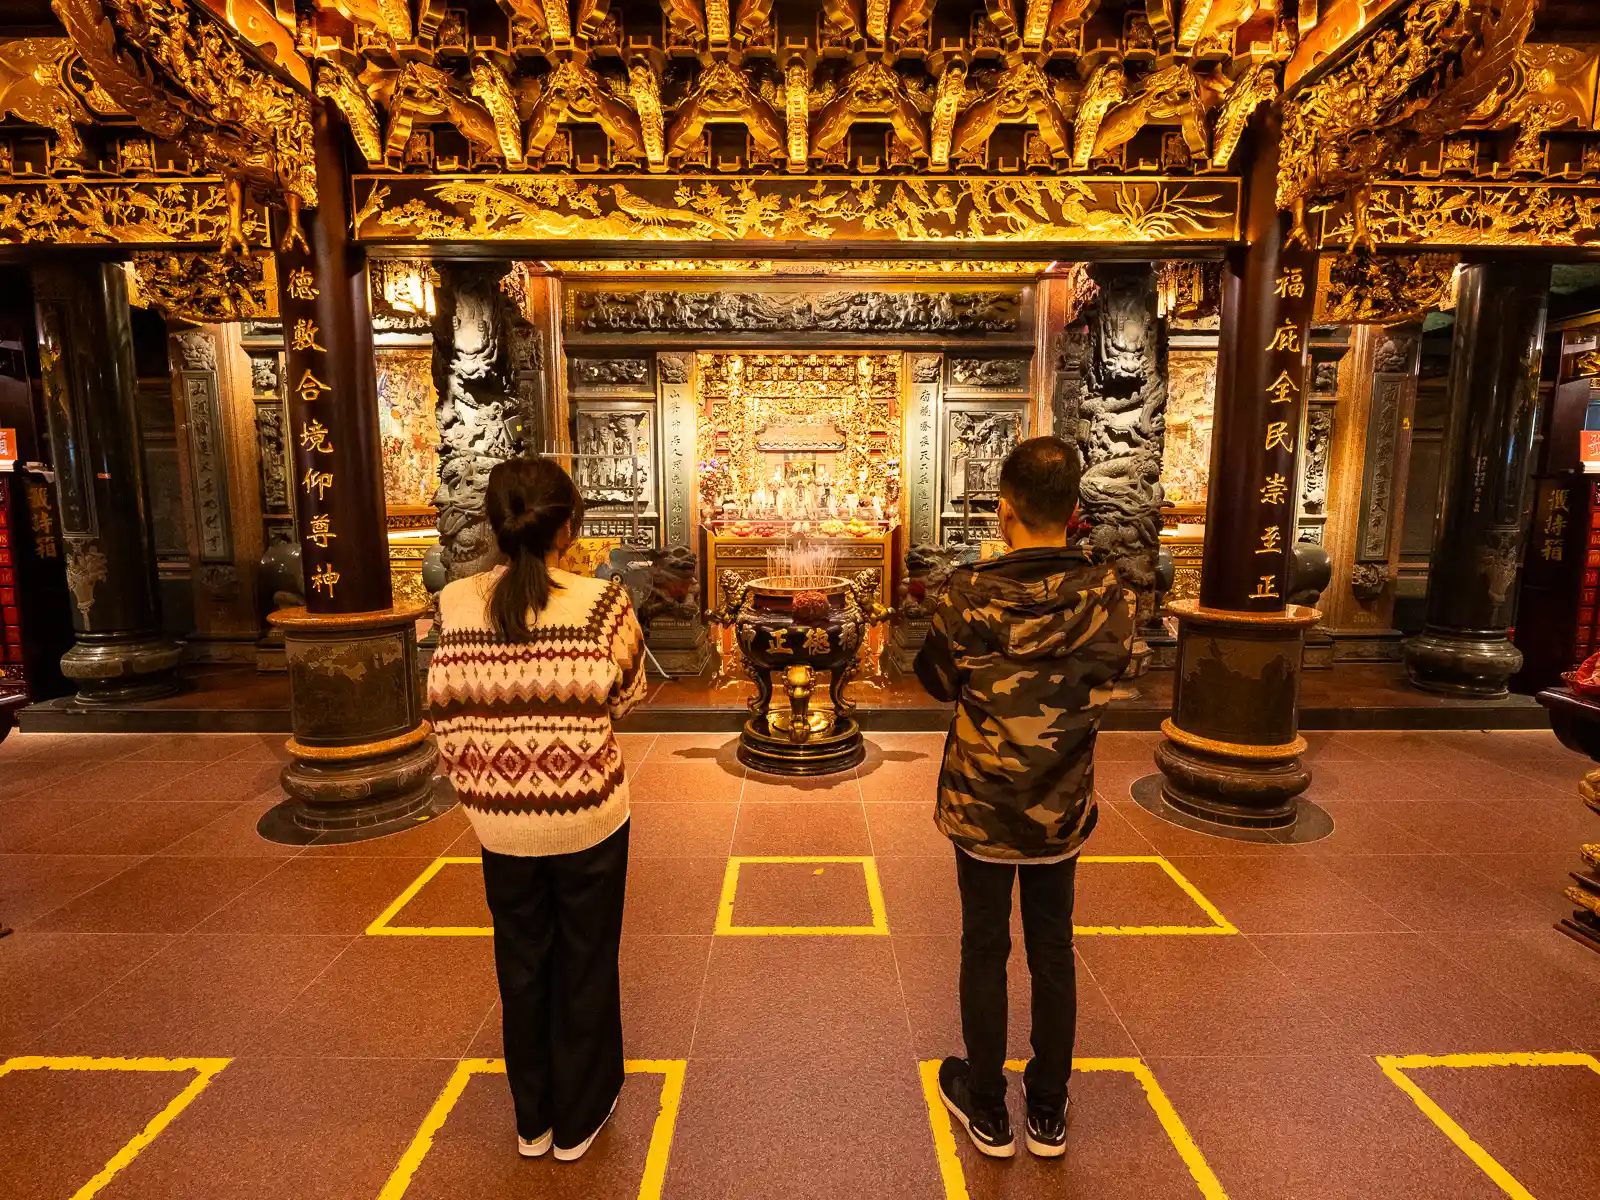 A couple prays in front of a wall decorated with beautiful painted wood carvings.